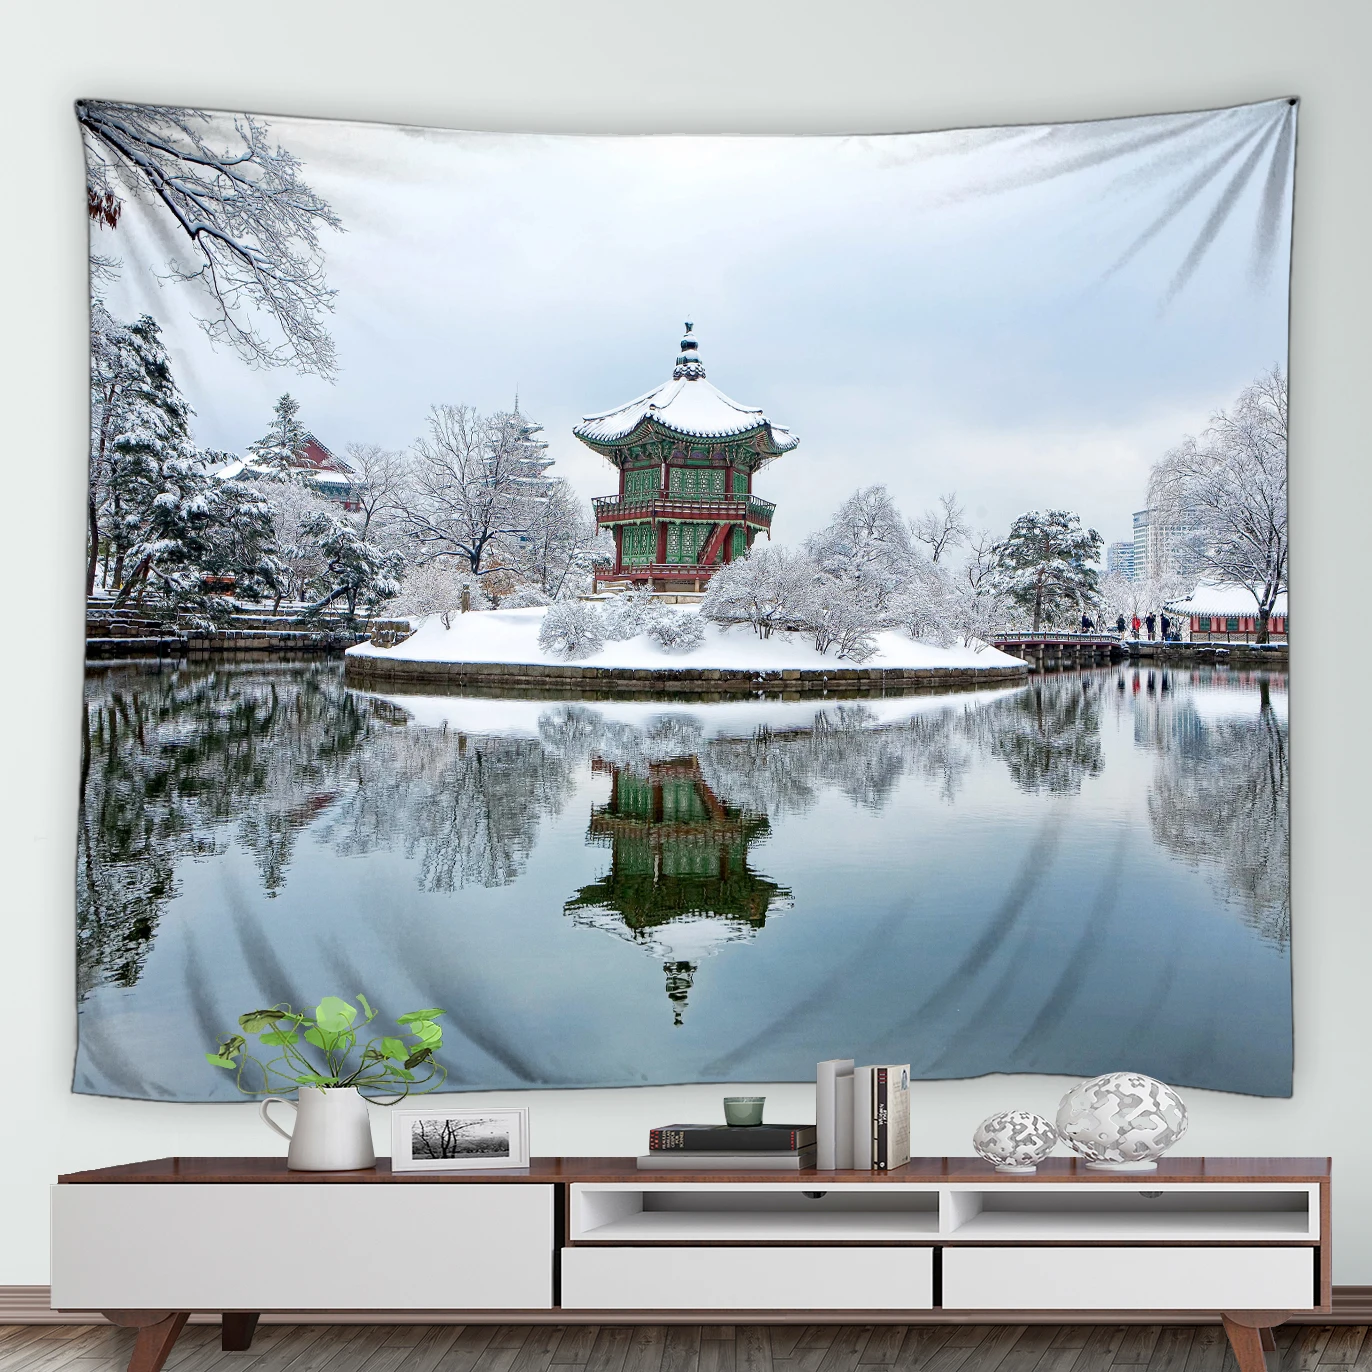 

Winter Landscape Tapestry Snow Trees Building Pavilion Chinese style Park Natural Scenery Wall Hanging Living Room Tapestries